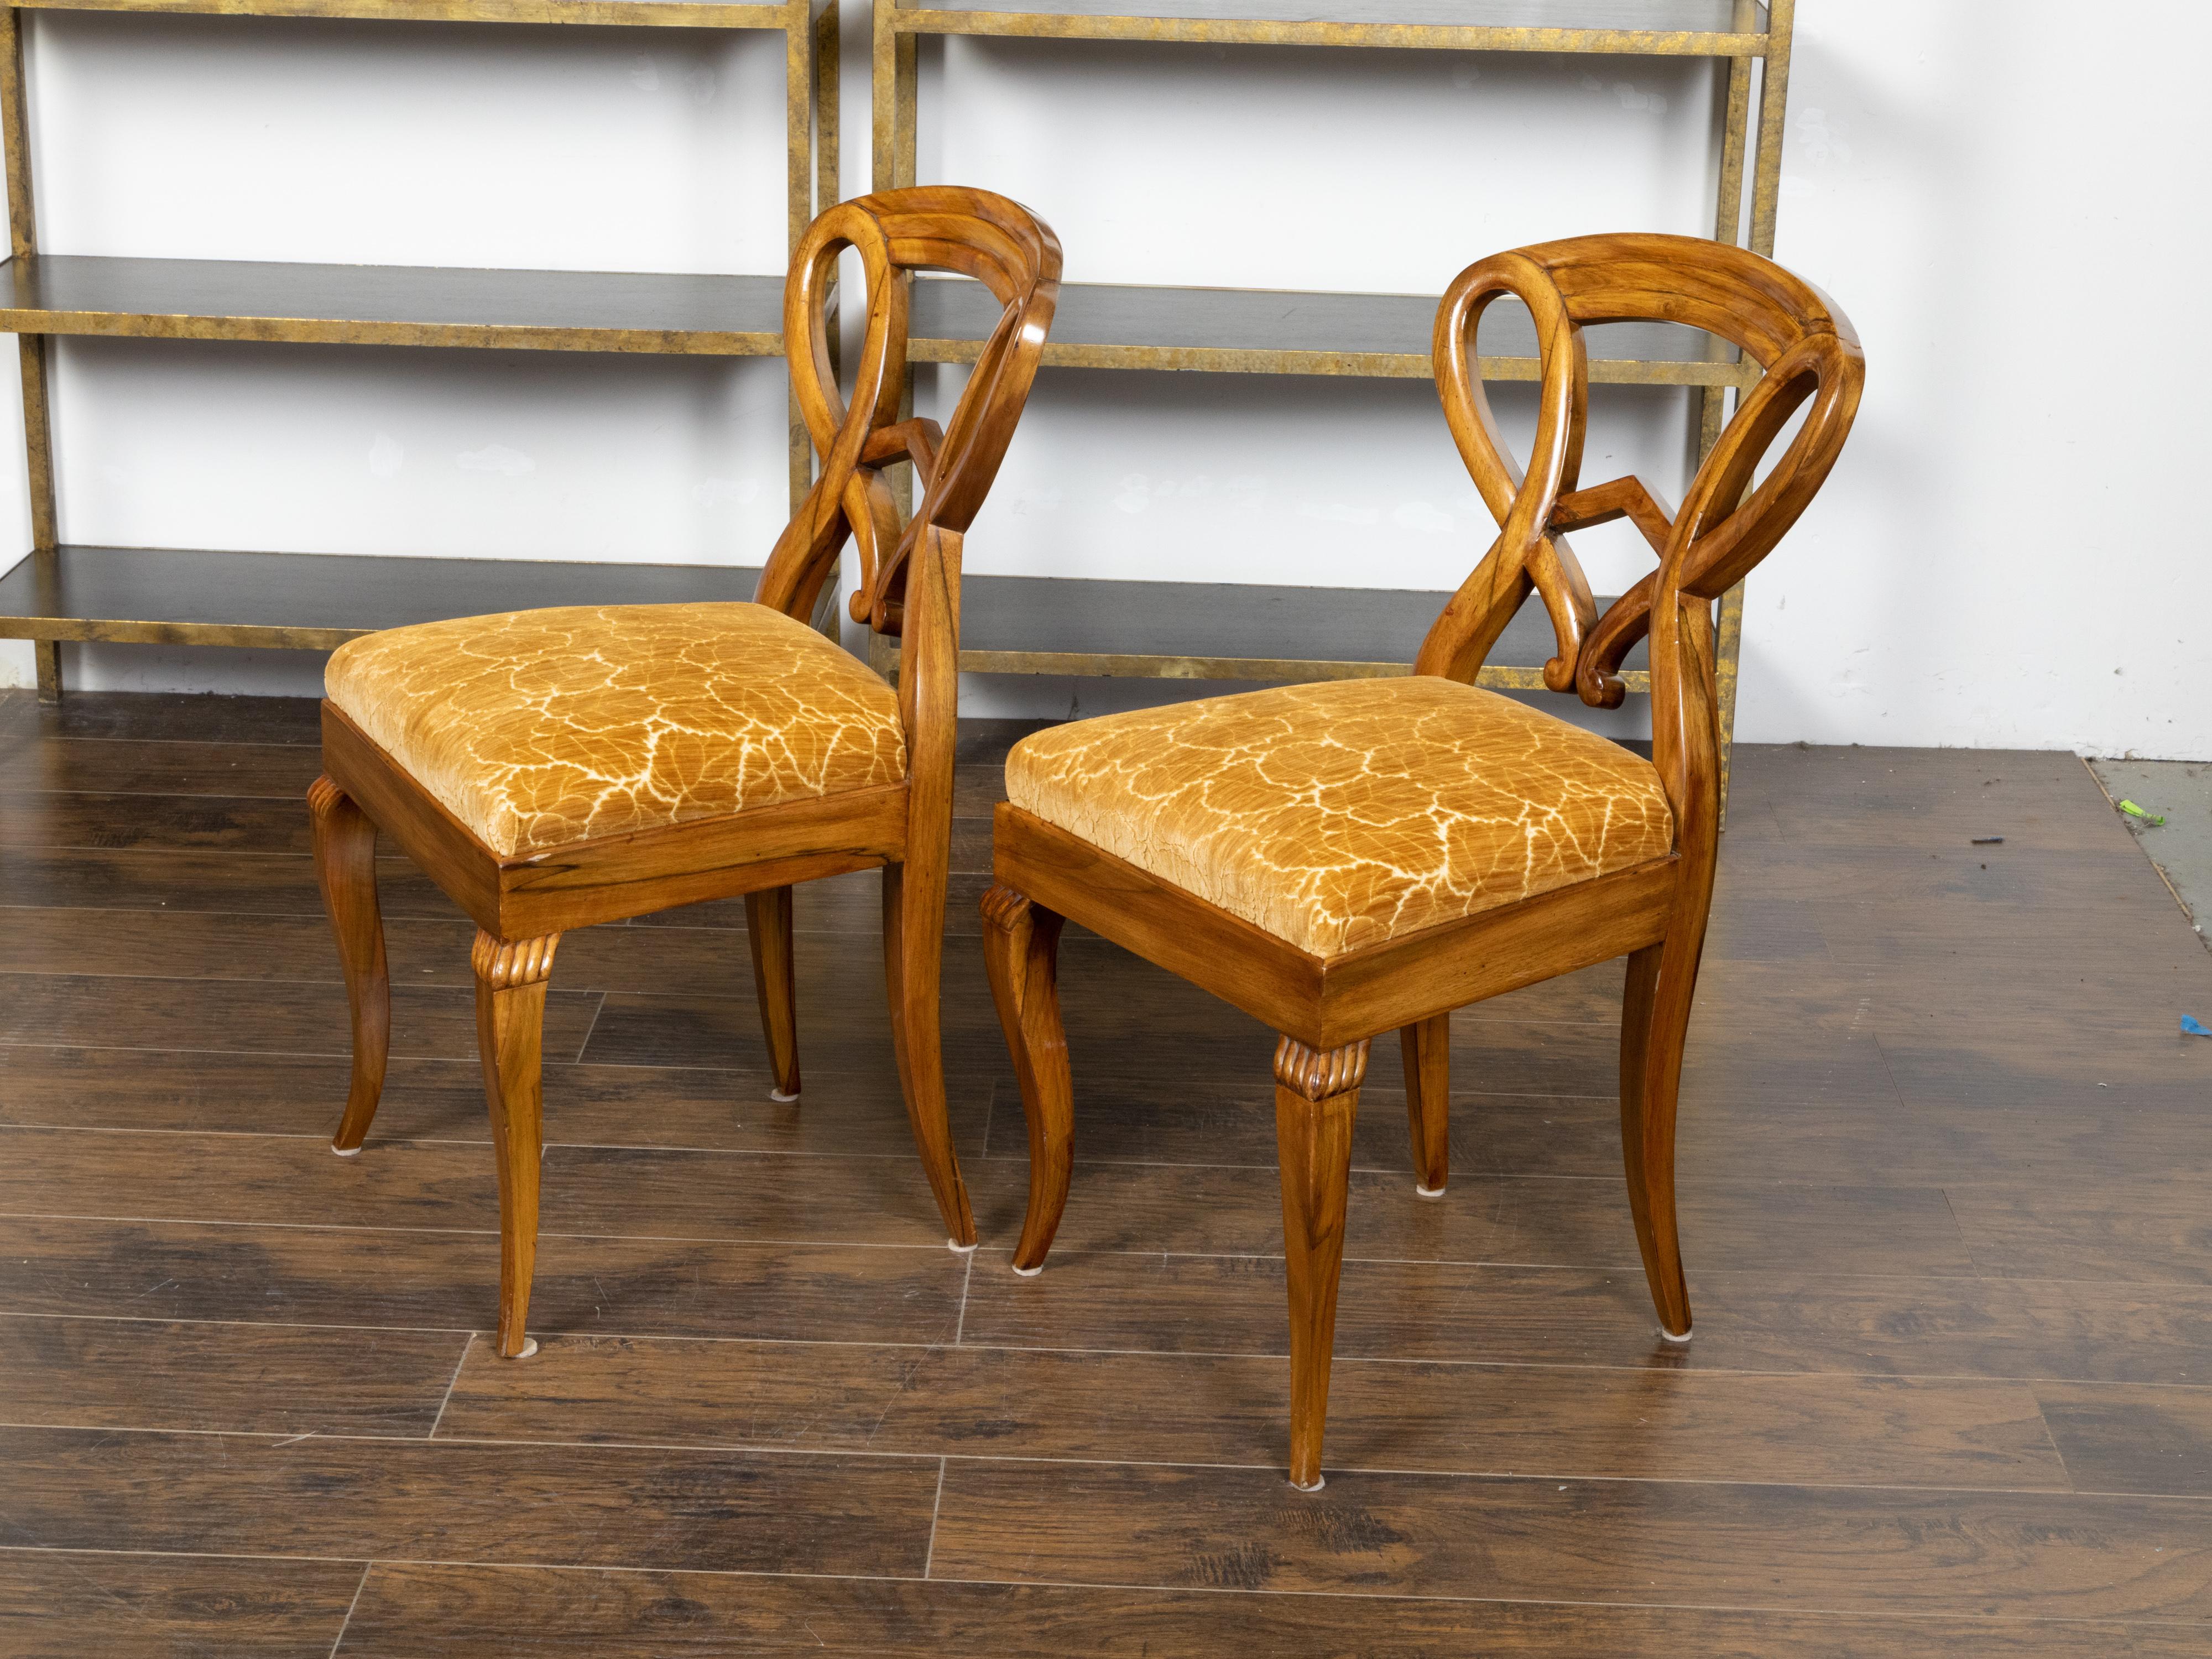 Pair of Austrian Biedermeier 19th Century Side Chairs with Carved Open Backs In Good Condition For Sale In Atlanta, GA